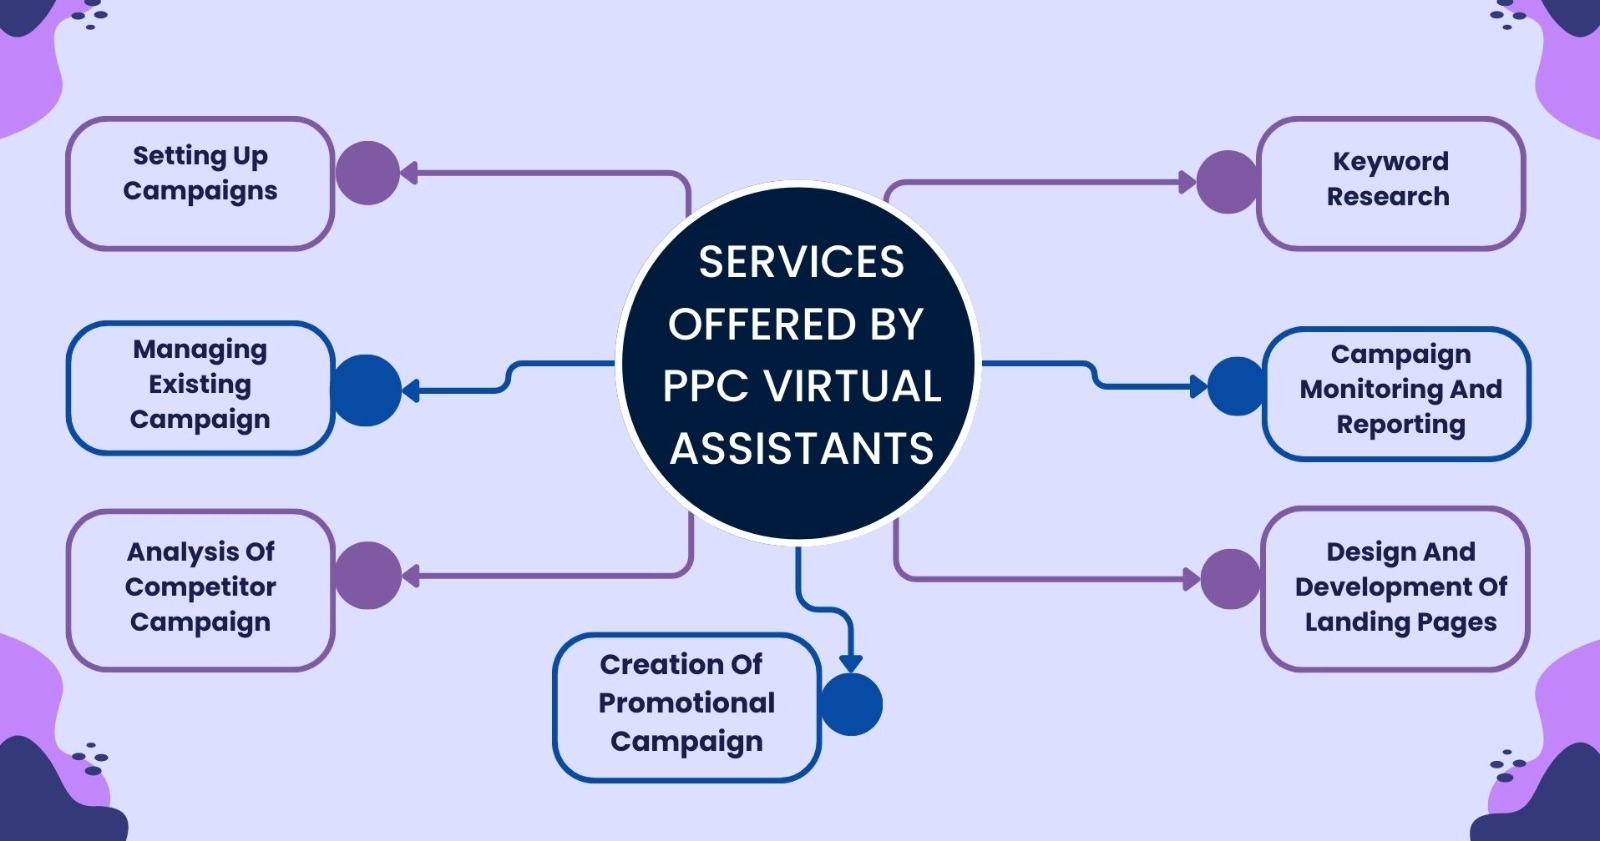 Services Offered by PPC Virtual Assistants